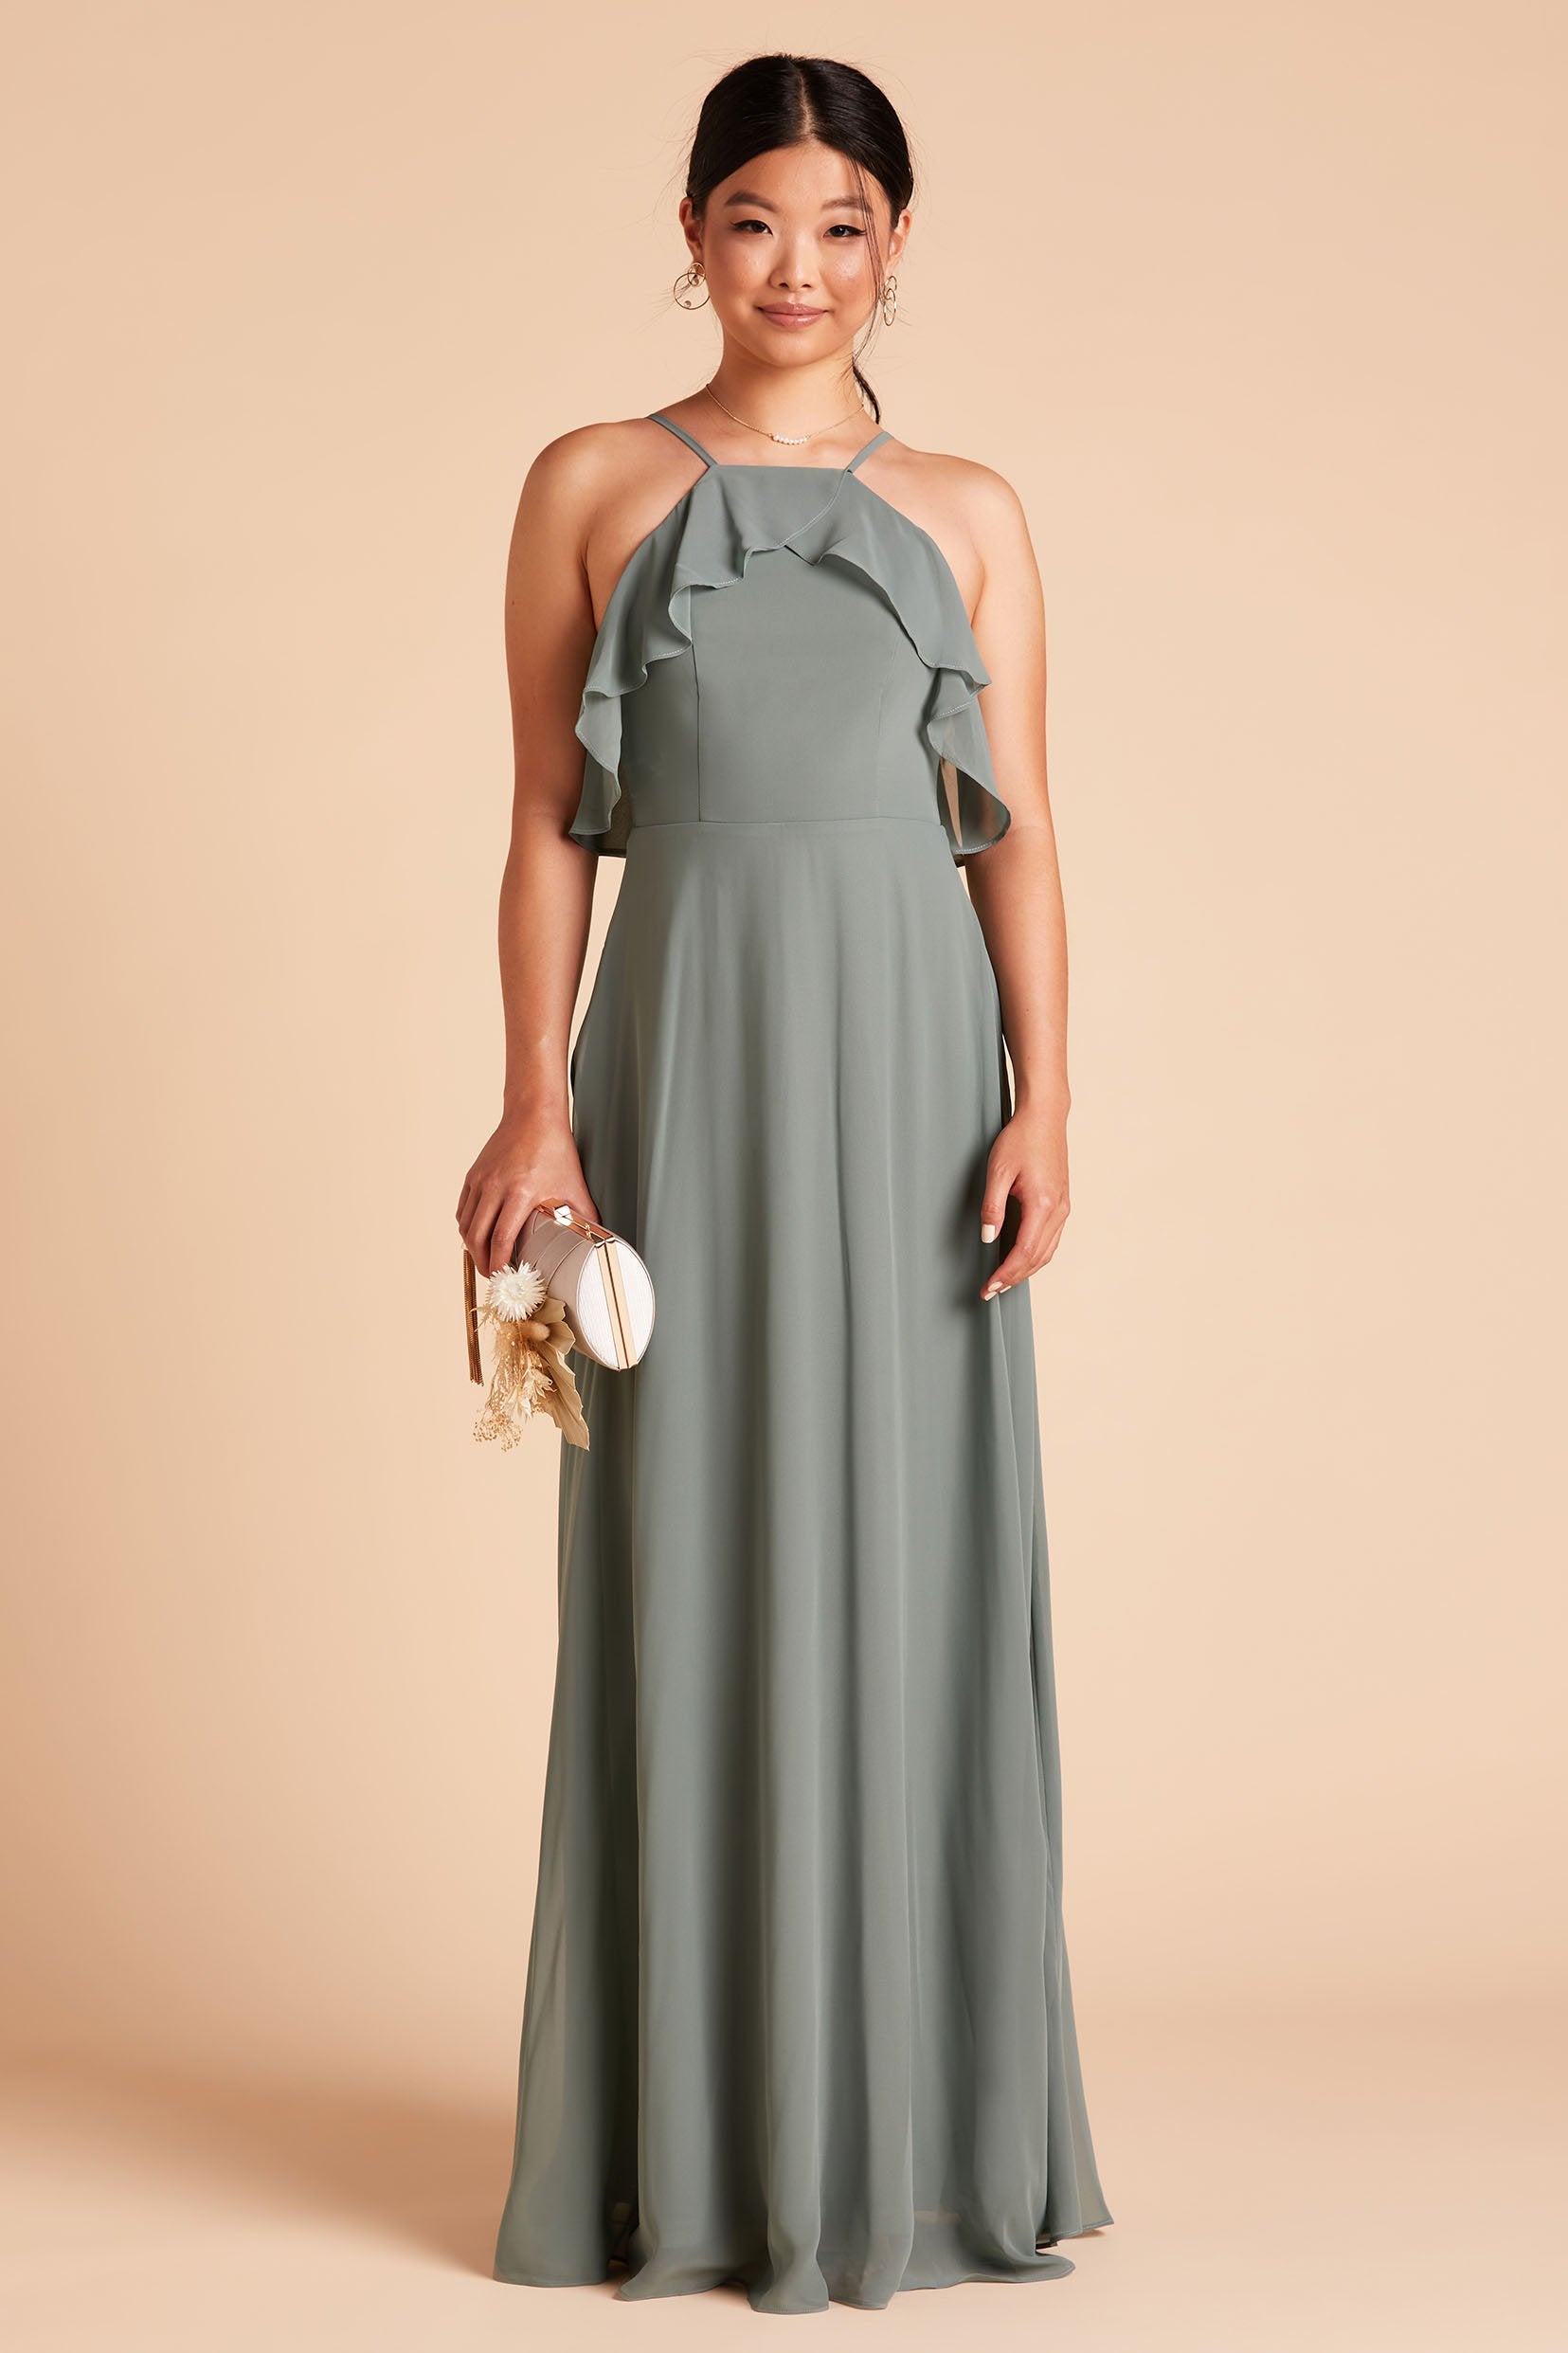 Jules bridesmaid dress in sea glass green chiffon by Birdy Grey, front view